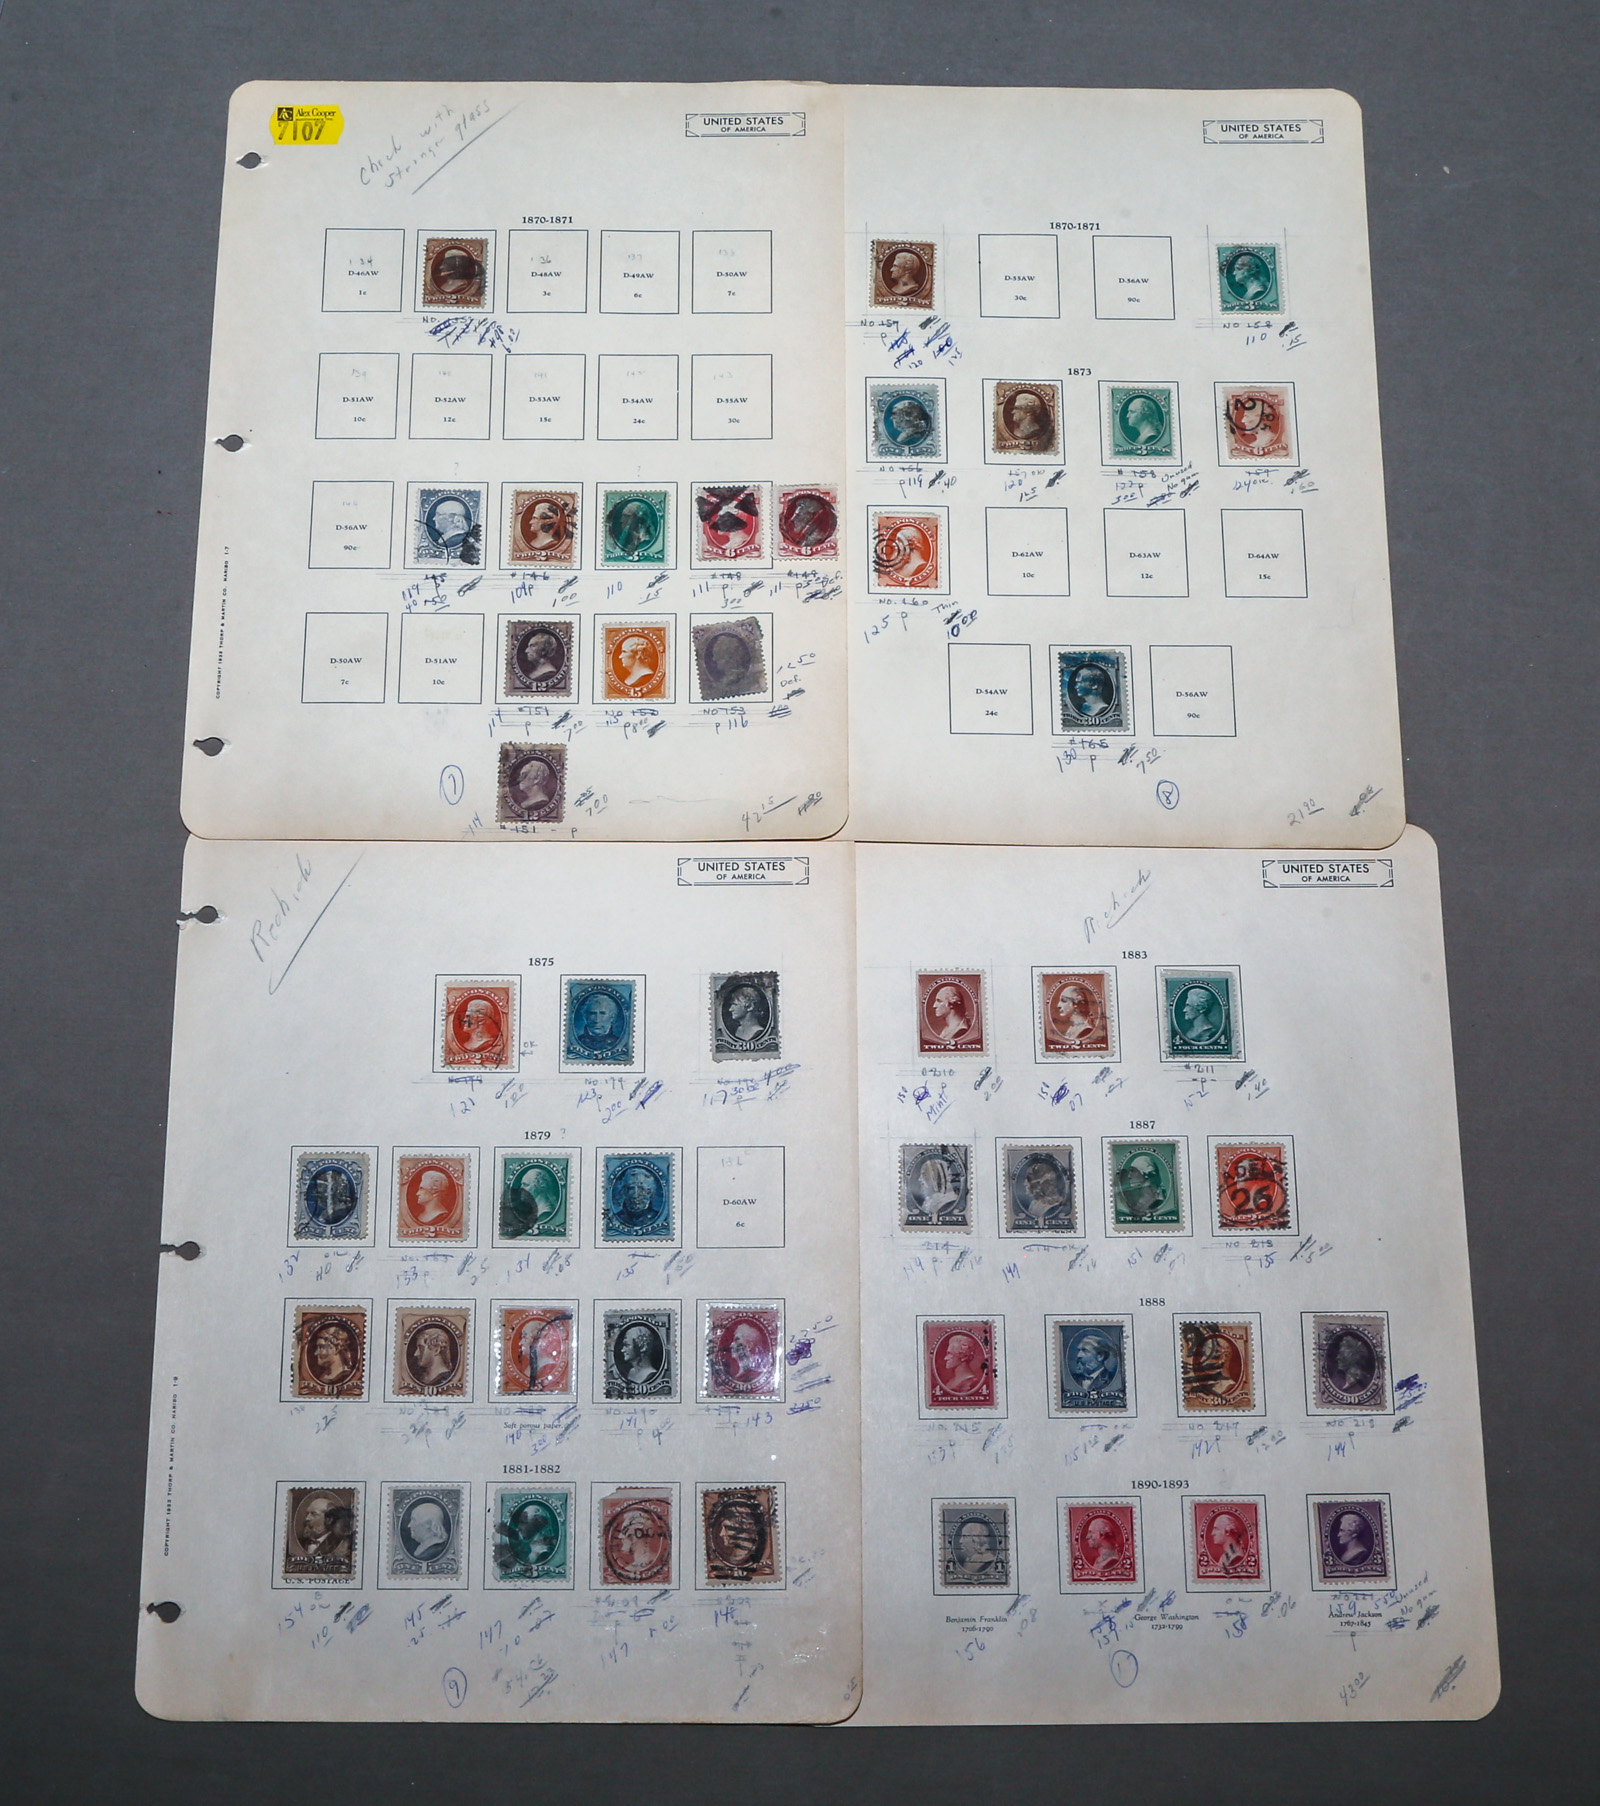 CLASSIC U S POSTAGE STAMPS BANK 3b2a7a